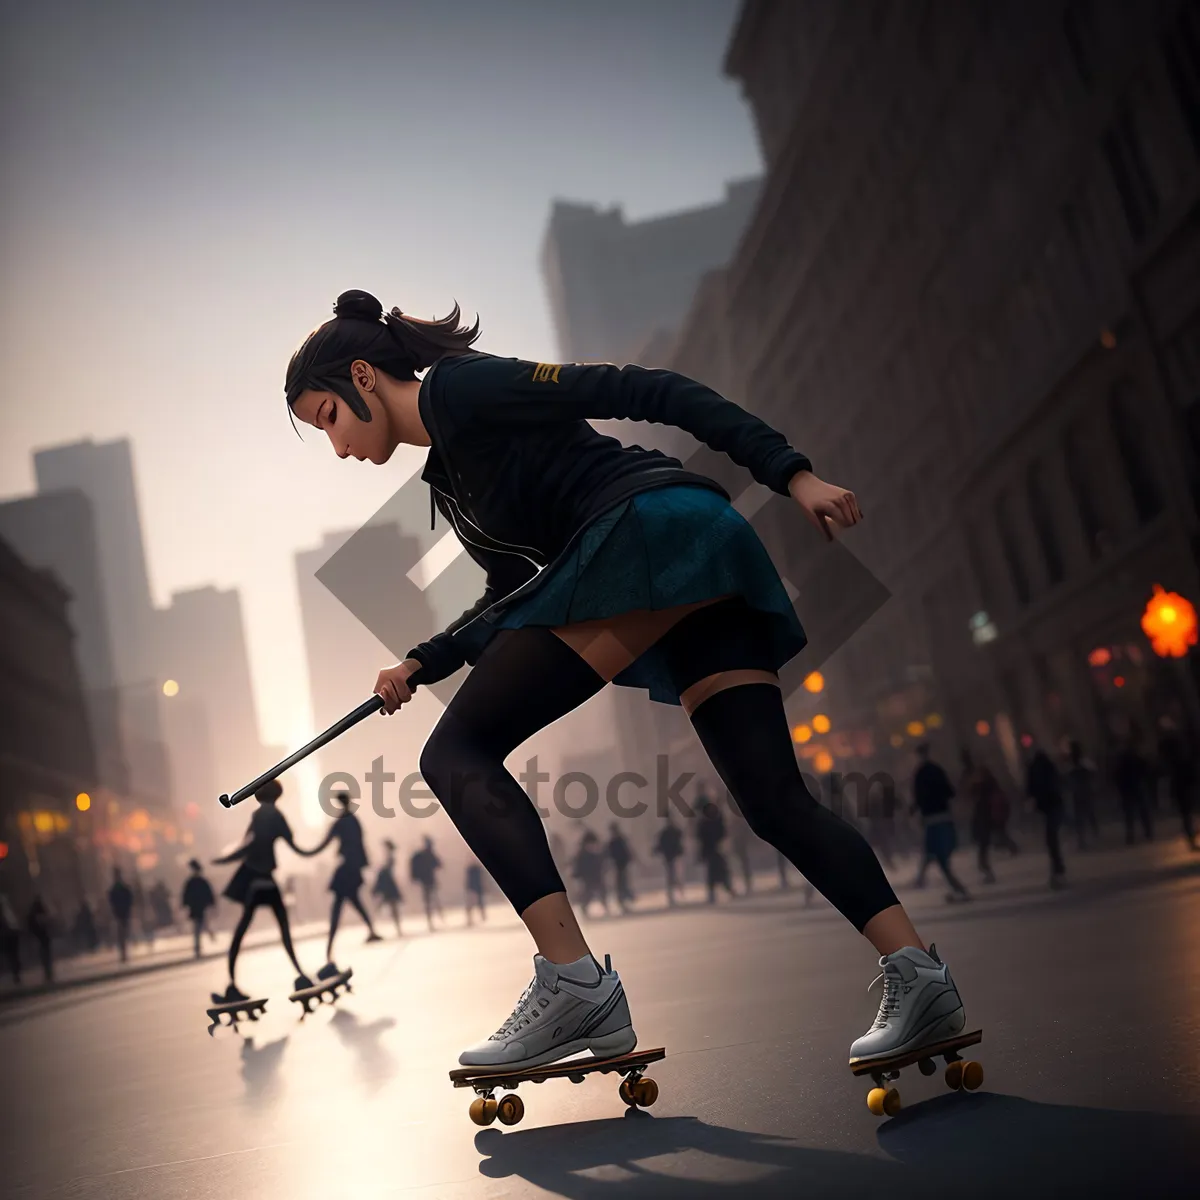 Picture of Skateboarder's Dynamic Jumping Stance in Urban Setting